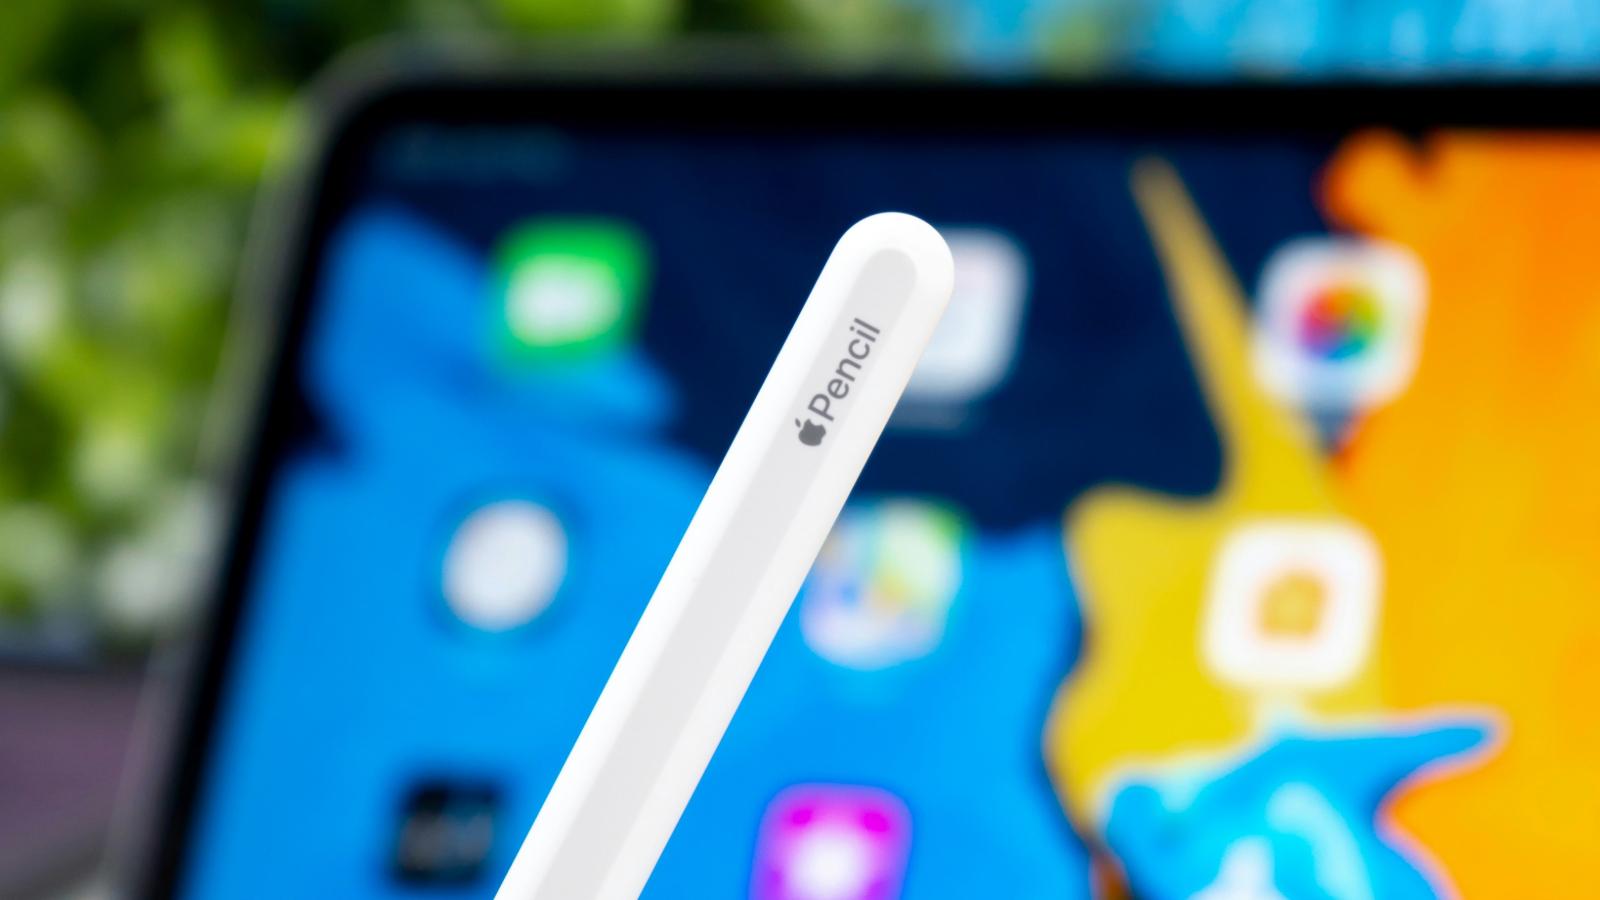 Apple Pencil with a blurred background featuring an iPad